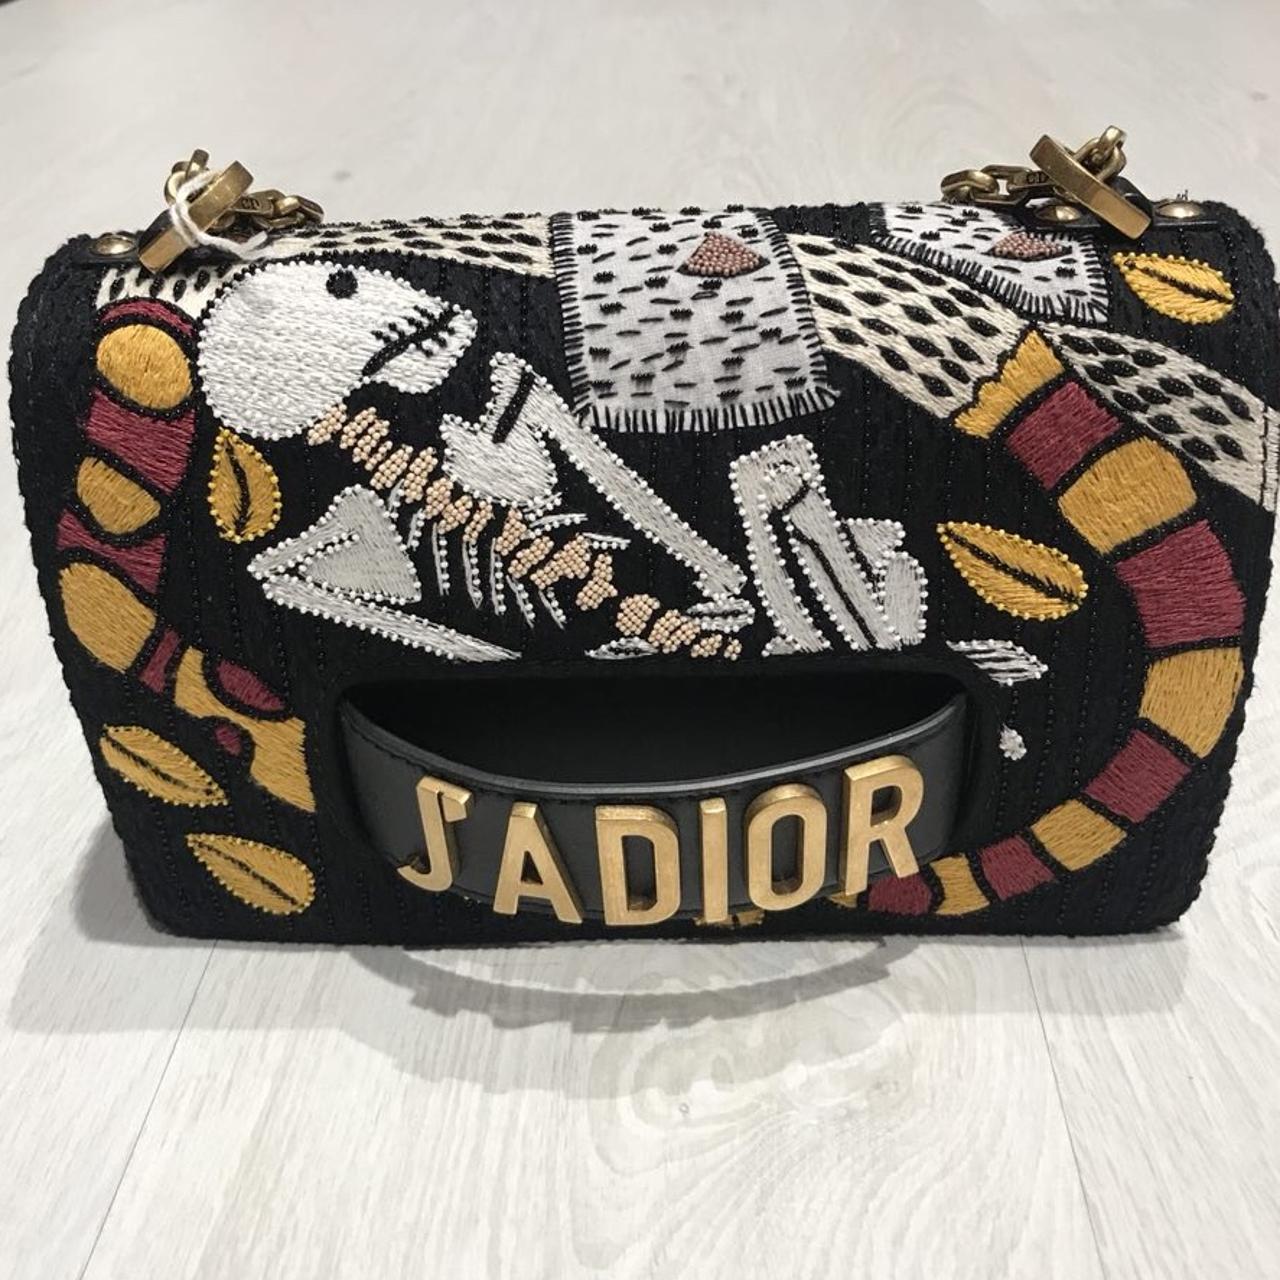 J'Adior Flap Bag with Chain and Extra Dior Strap GHW | Bag Religion